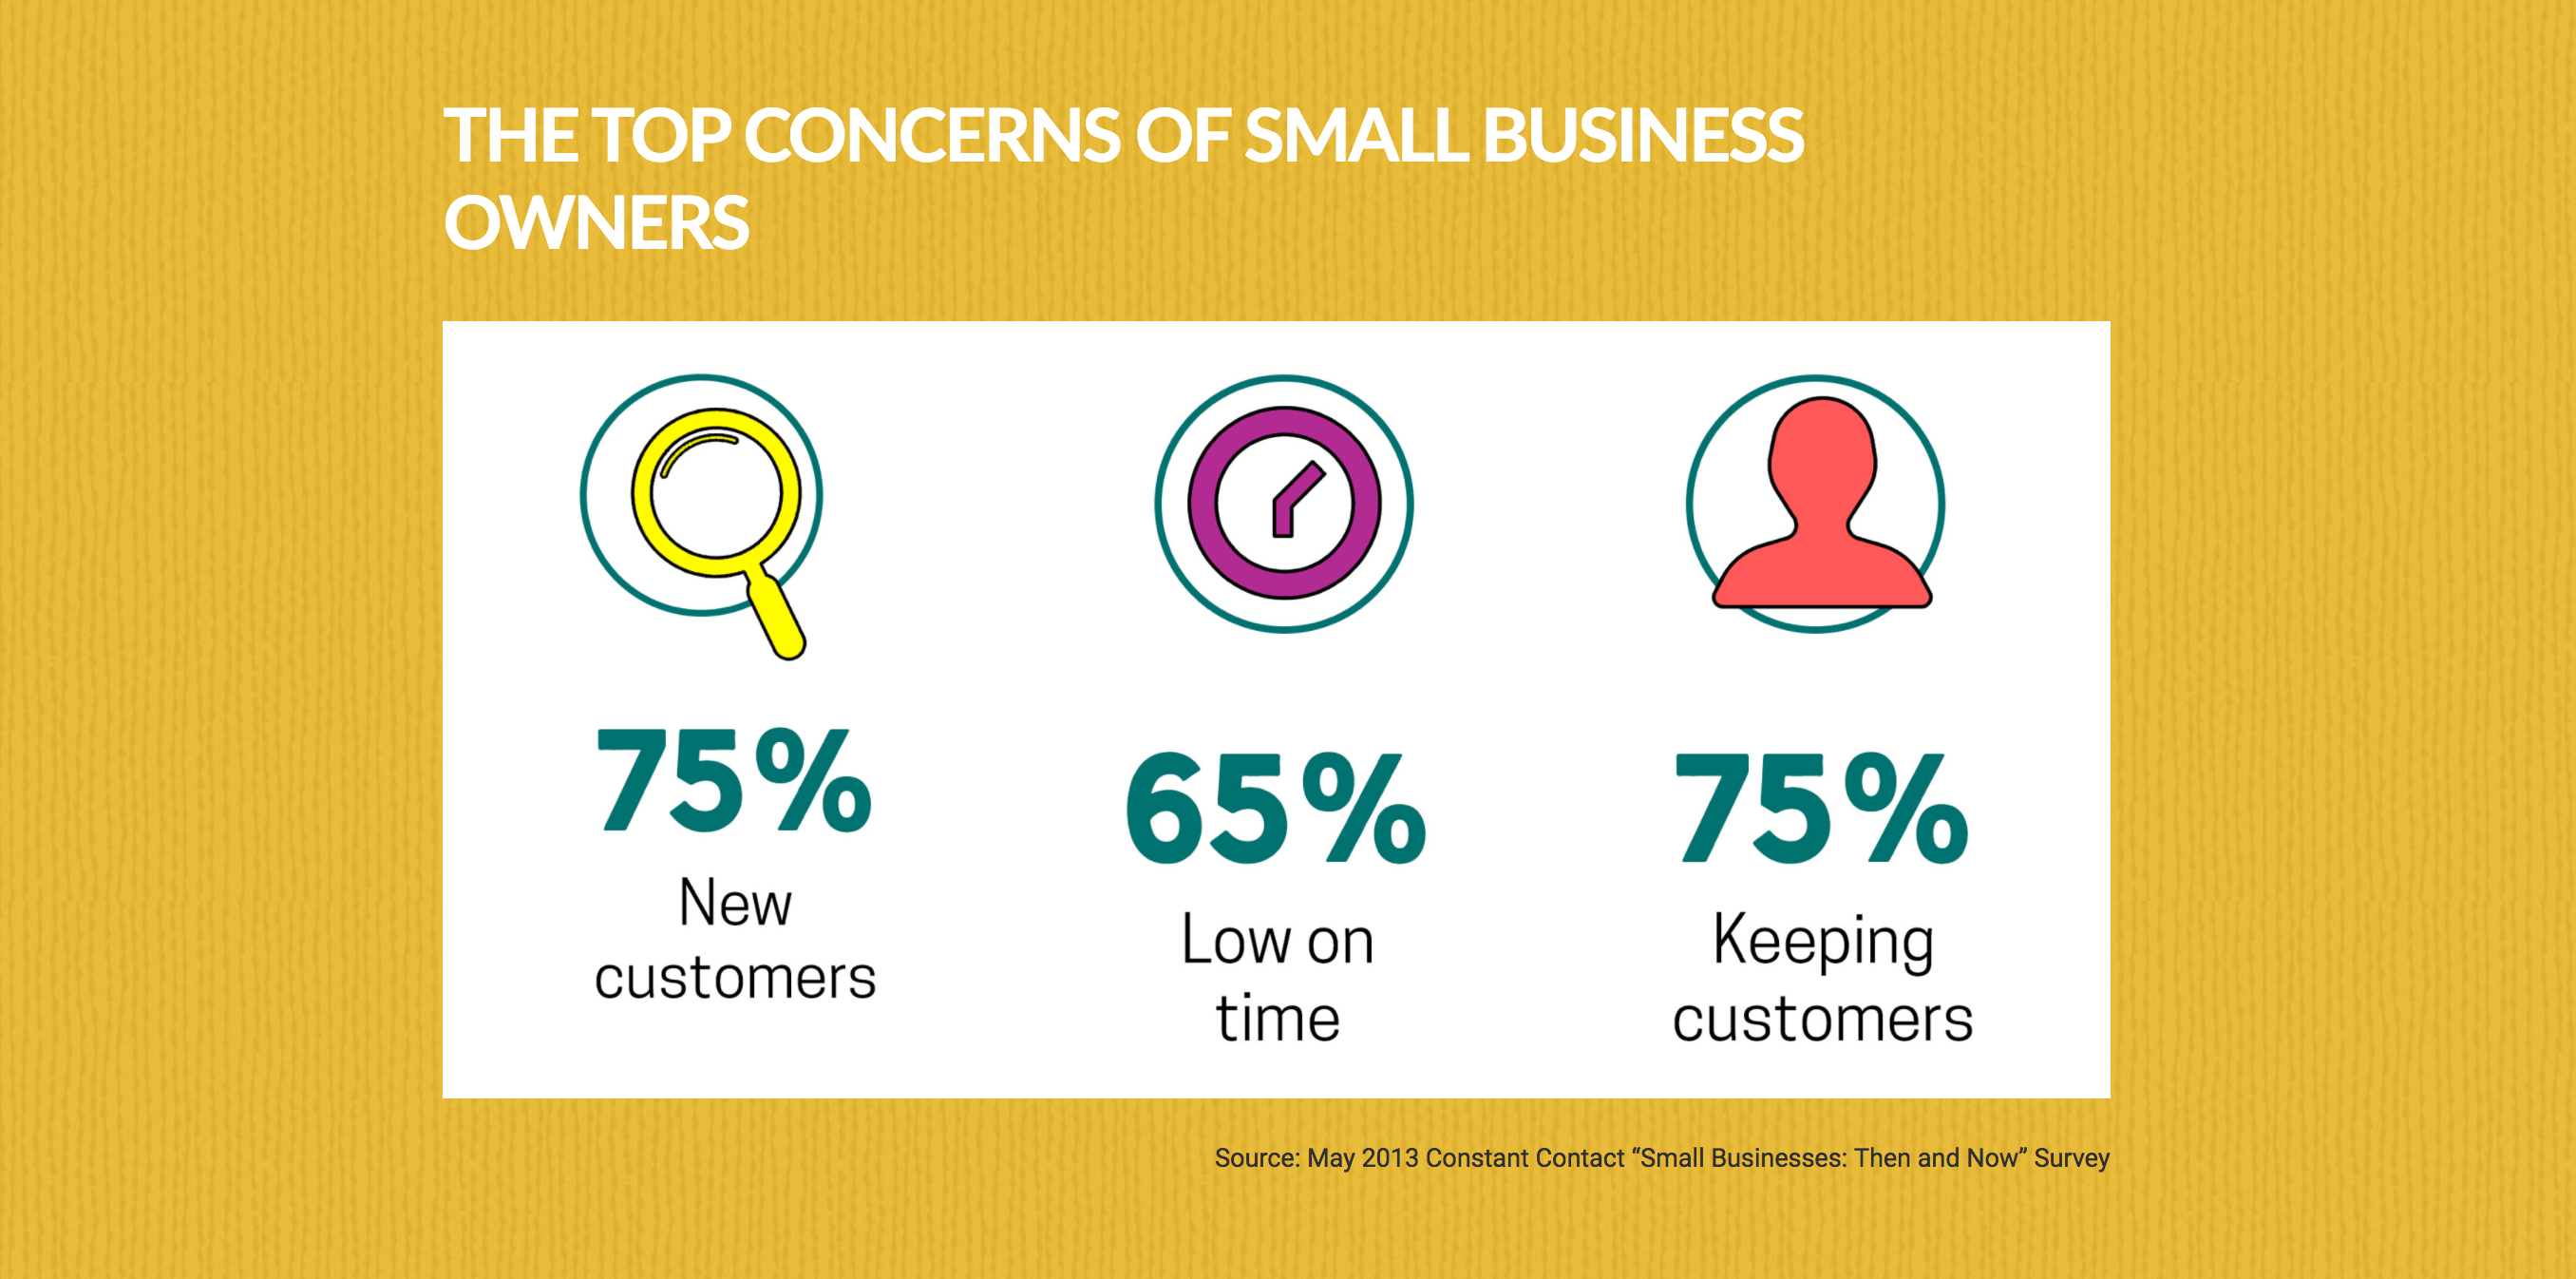 The top concerns of small business owners: having enough time, getting more leads, getting more sales